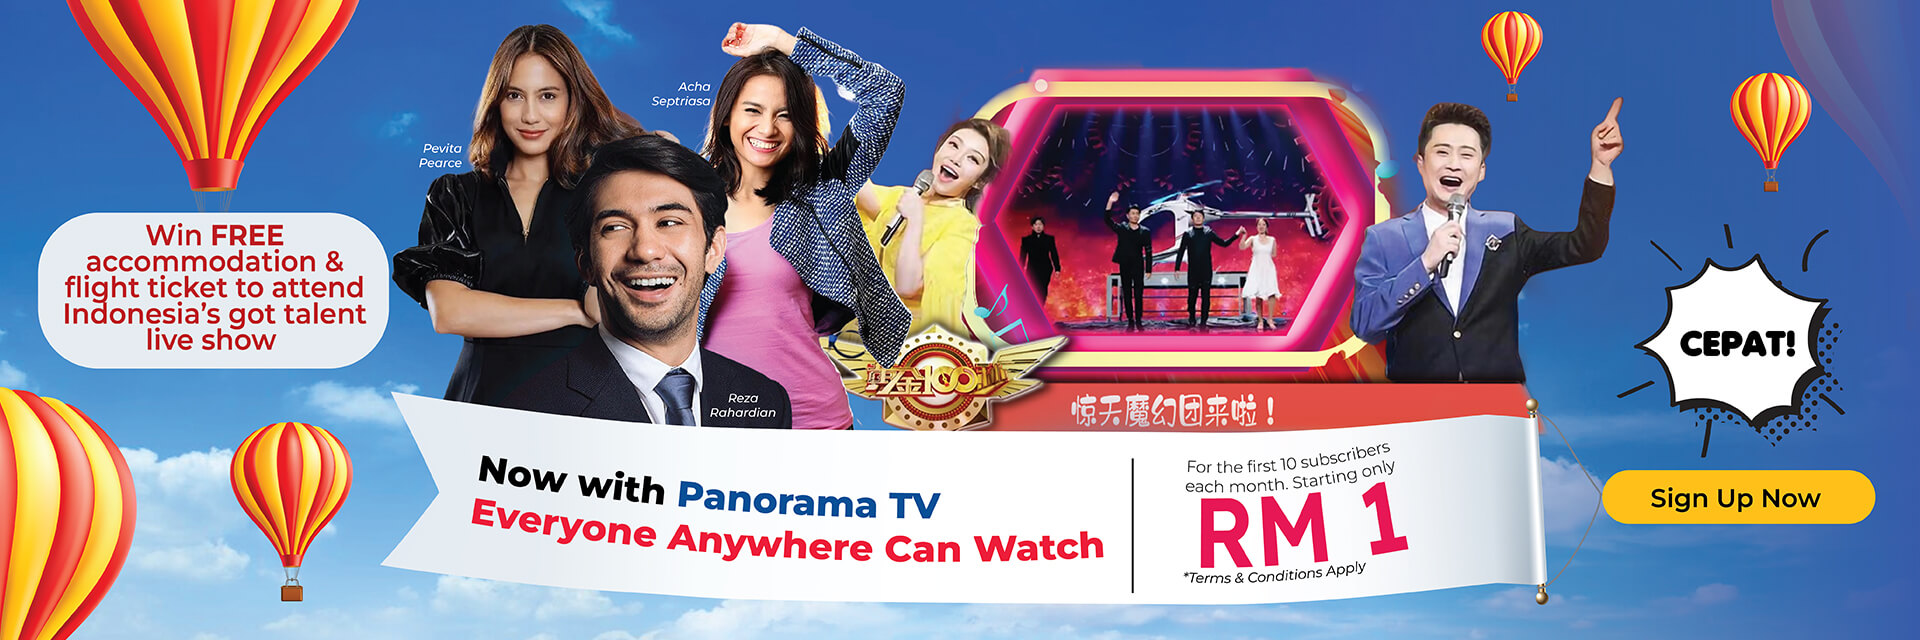 Advertisement for Panorama TV featuring diverse, joyful people, hot air balloons, promoting everyone's 2 anchors with mic.